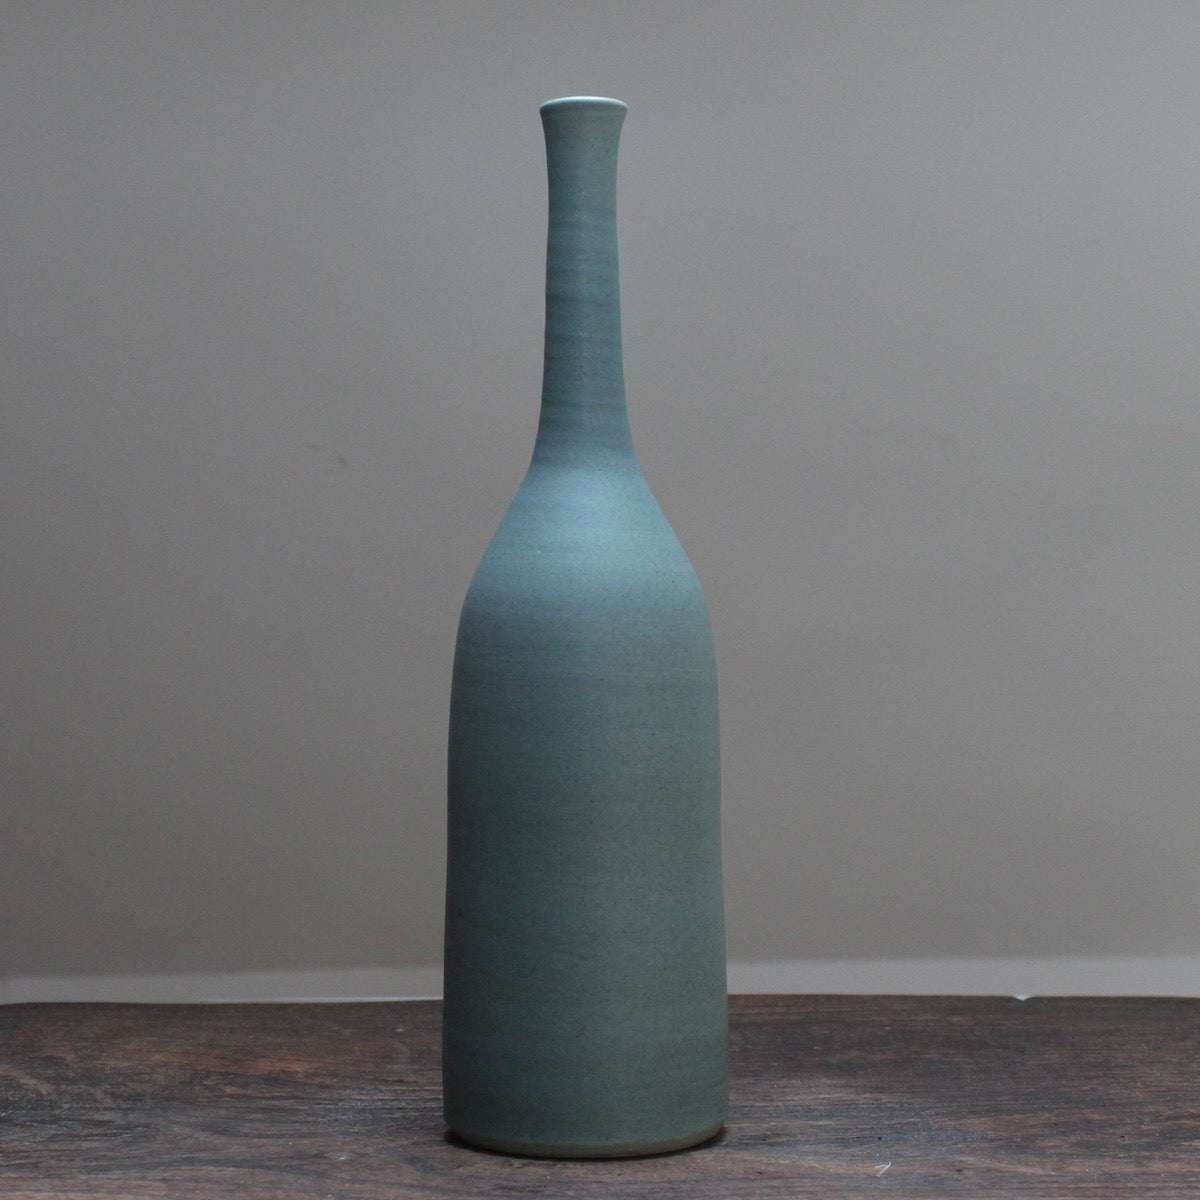 Lucy Burley light teal ceramic bottle - at the Byre Gallery